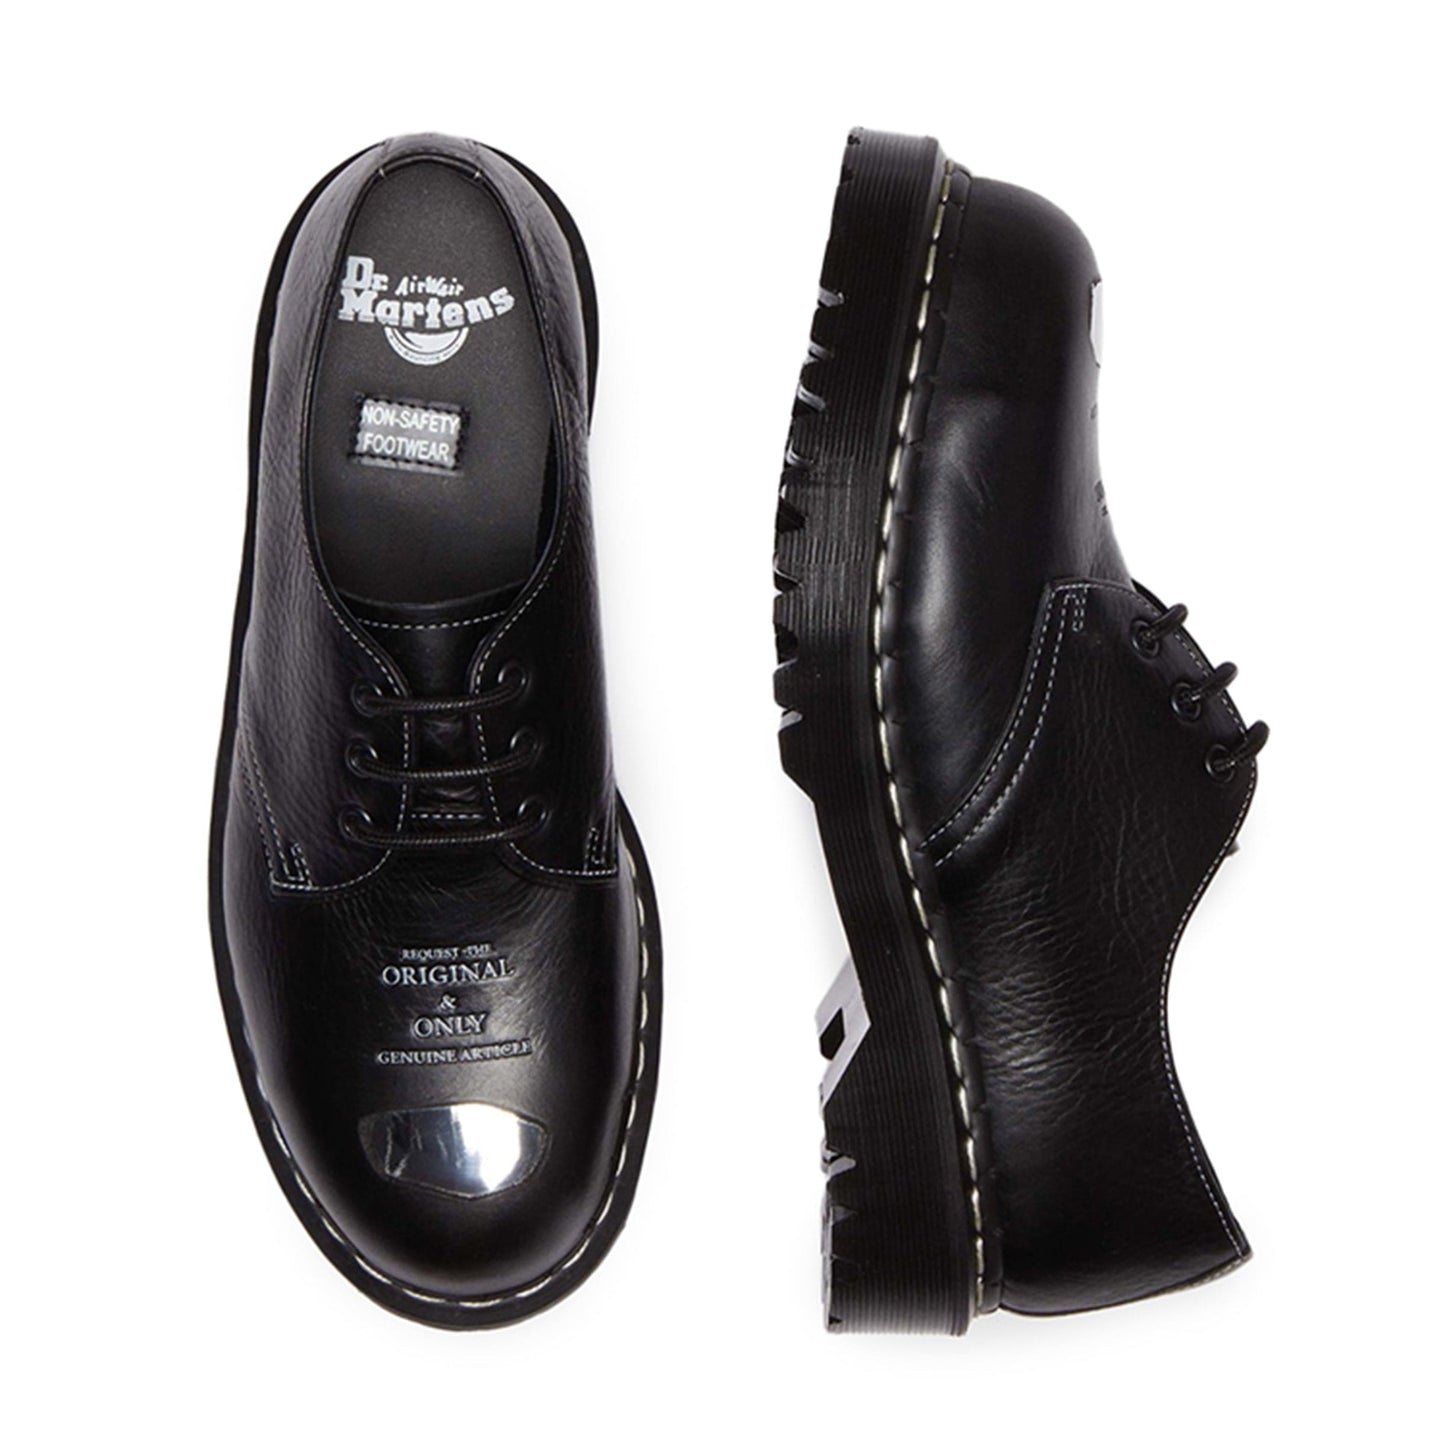 Dr. Martens Casual 1461 ST